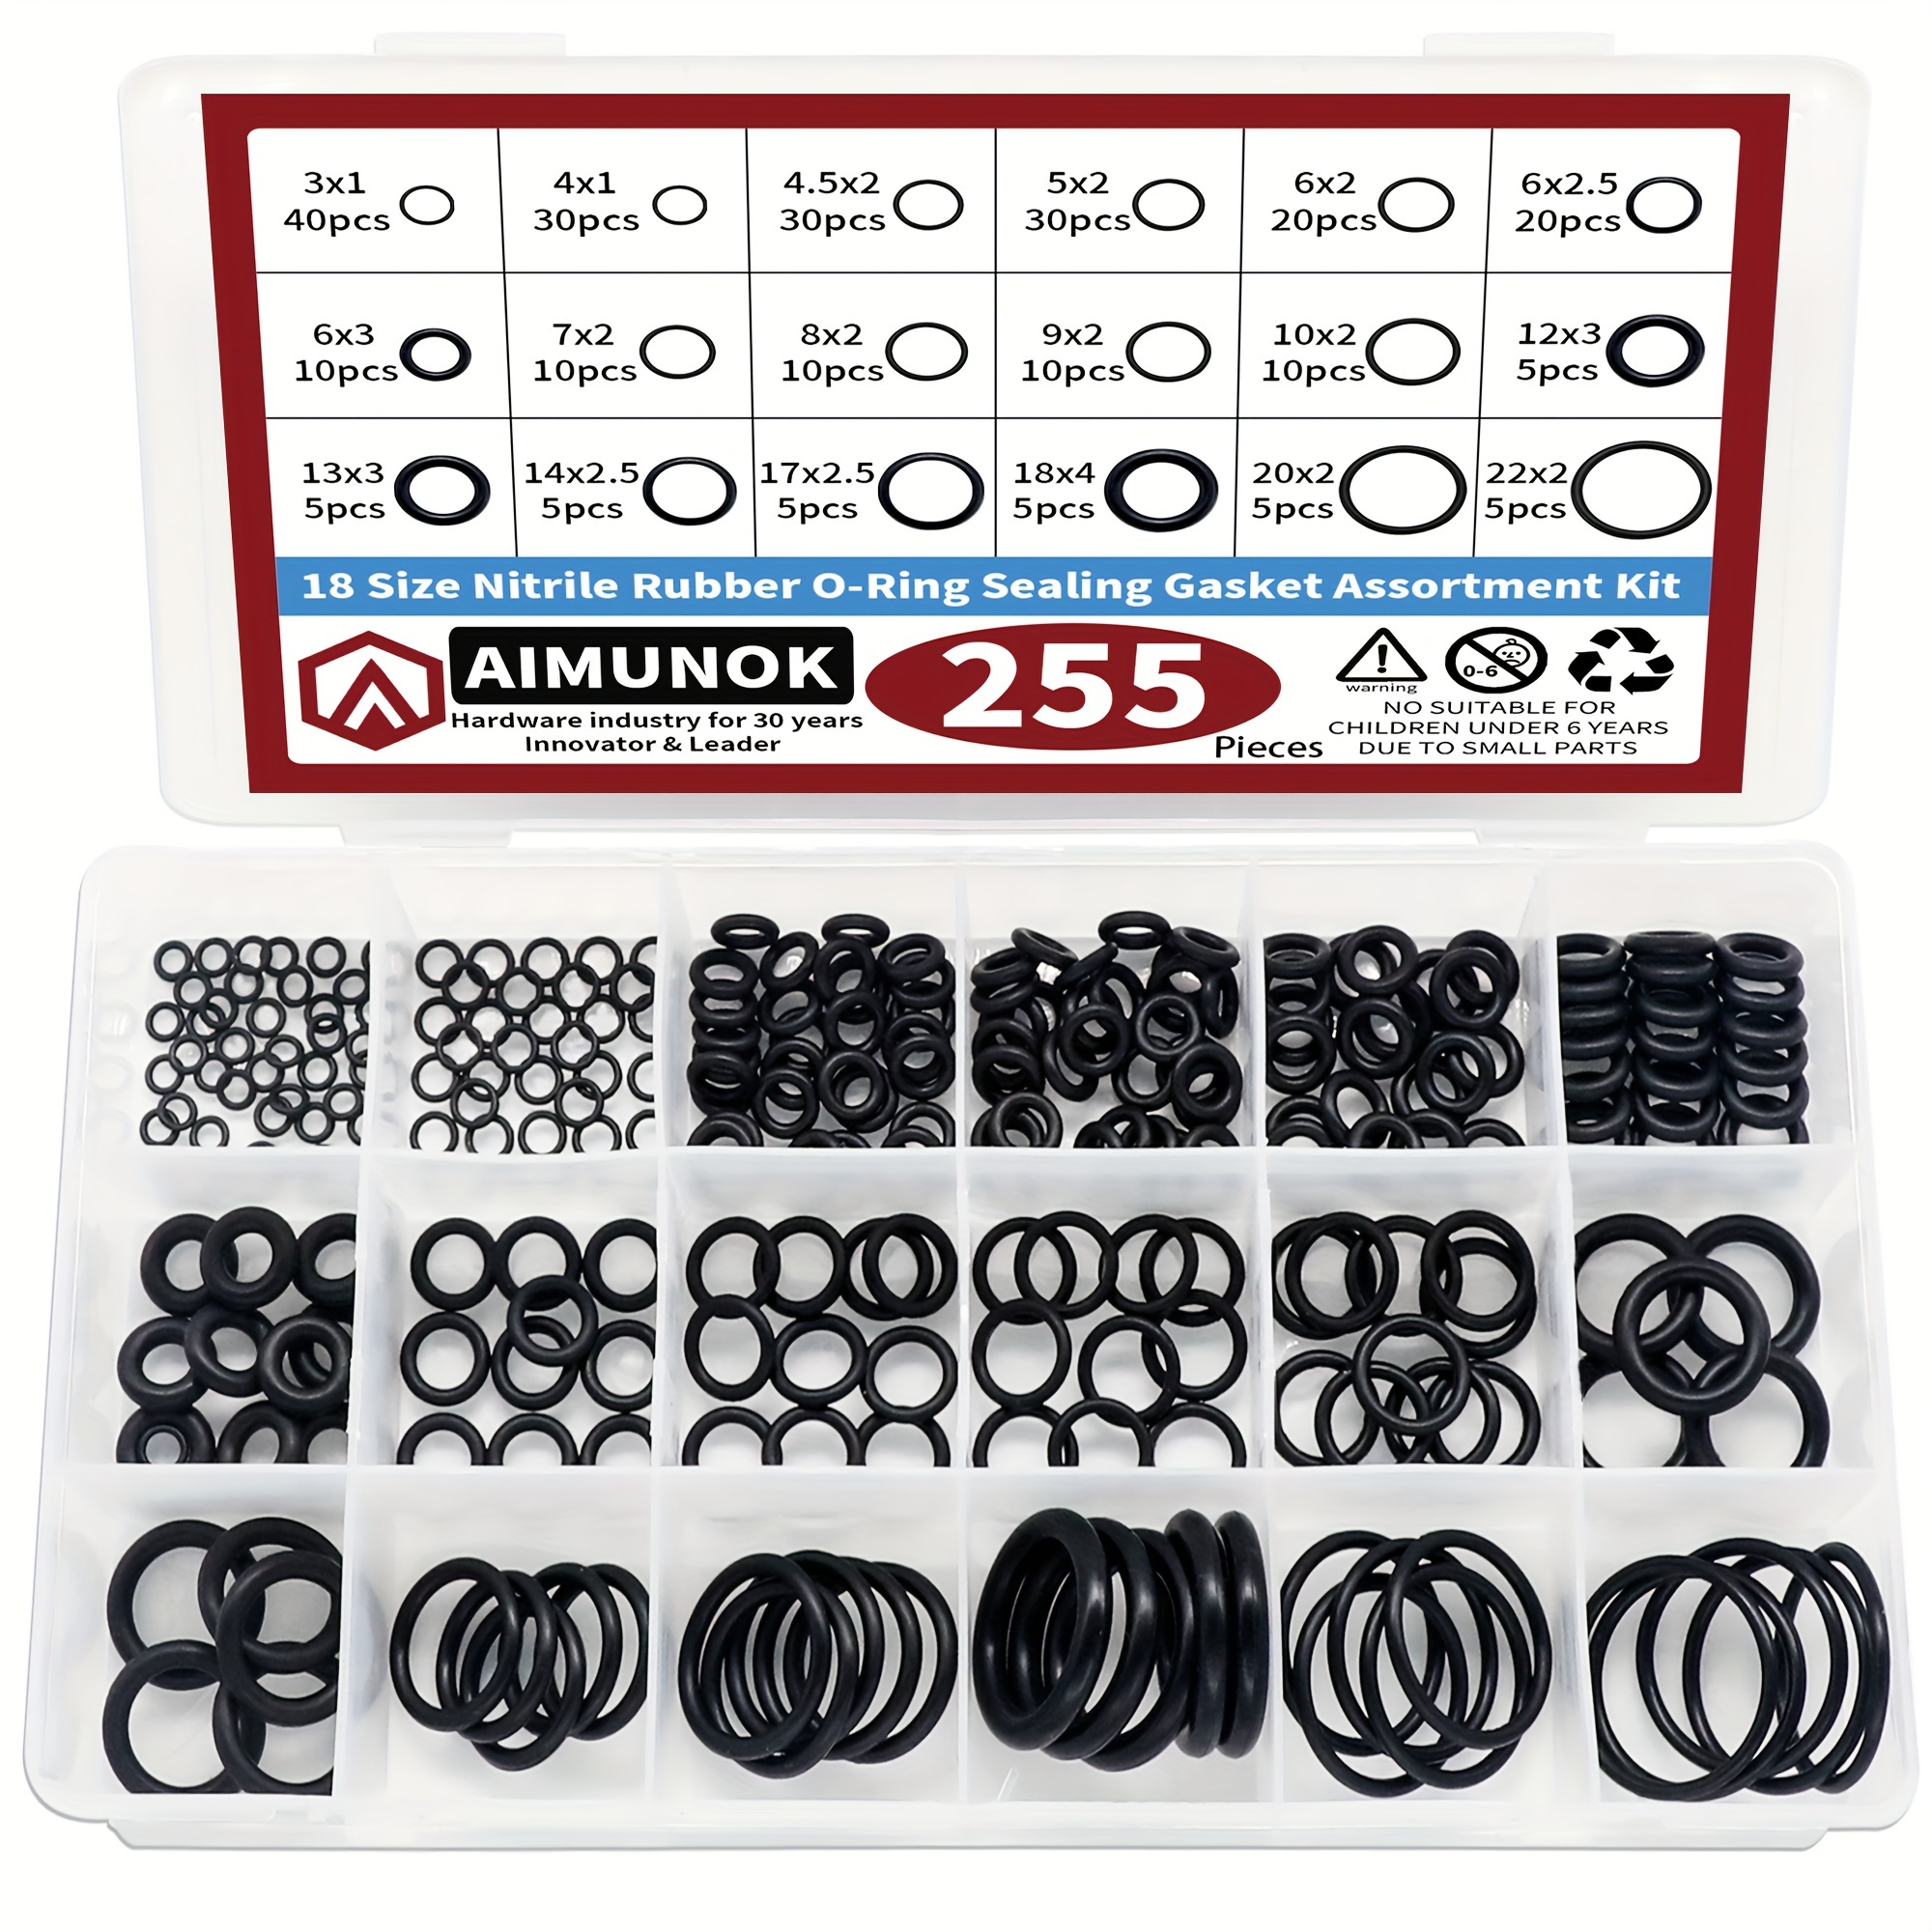 Nitrile Rubber O Rings Gasket Assortment Kit Sealing with Storage